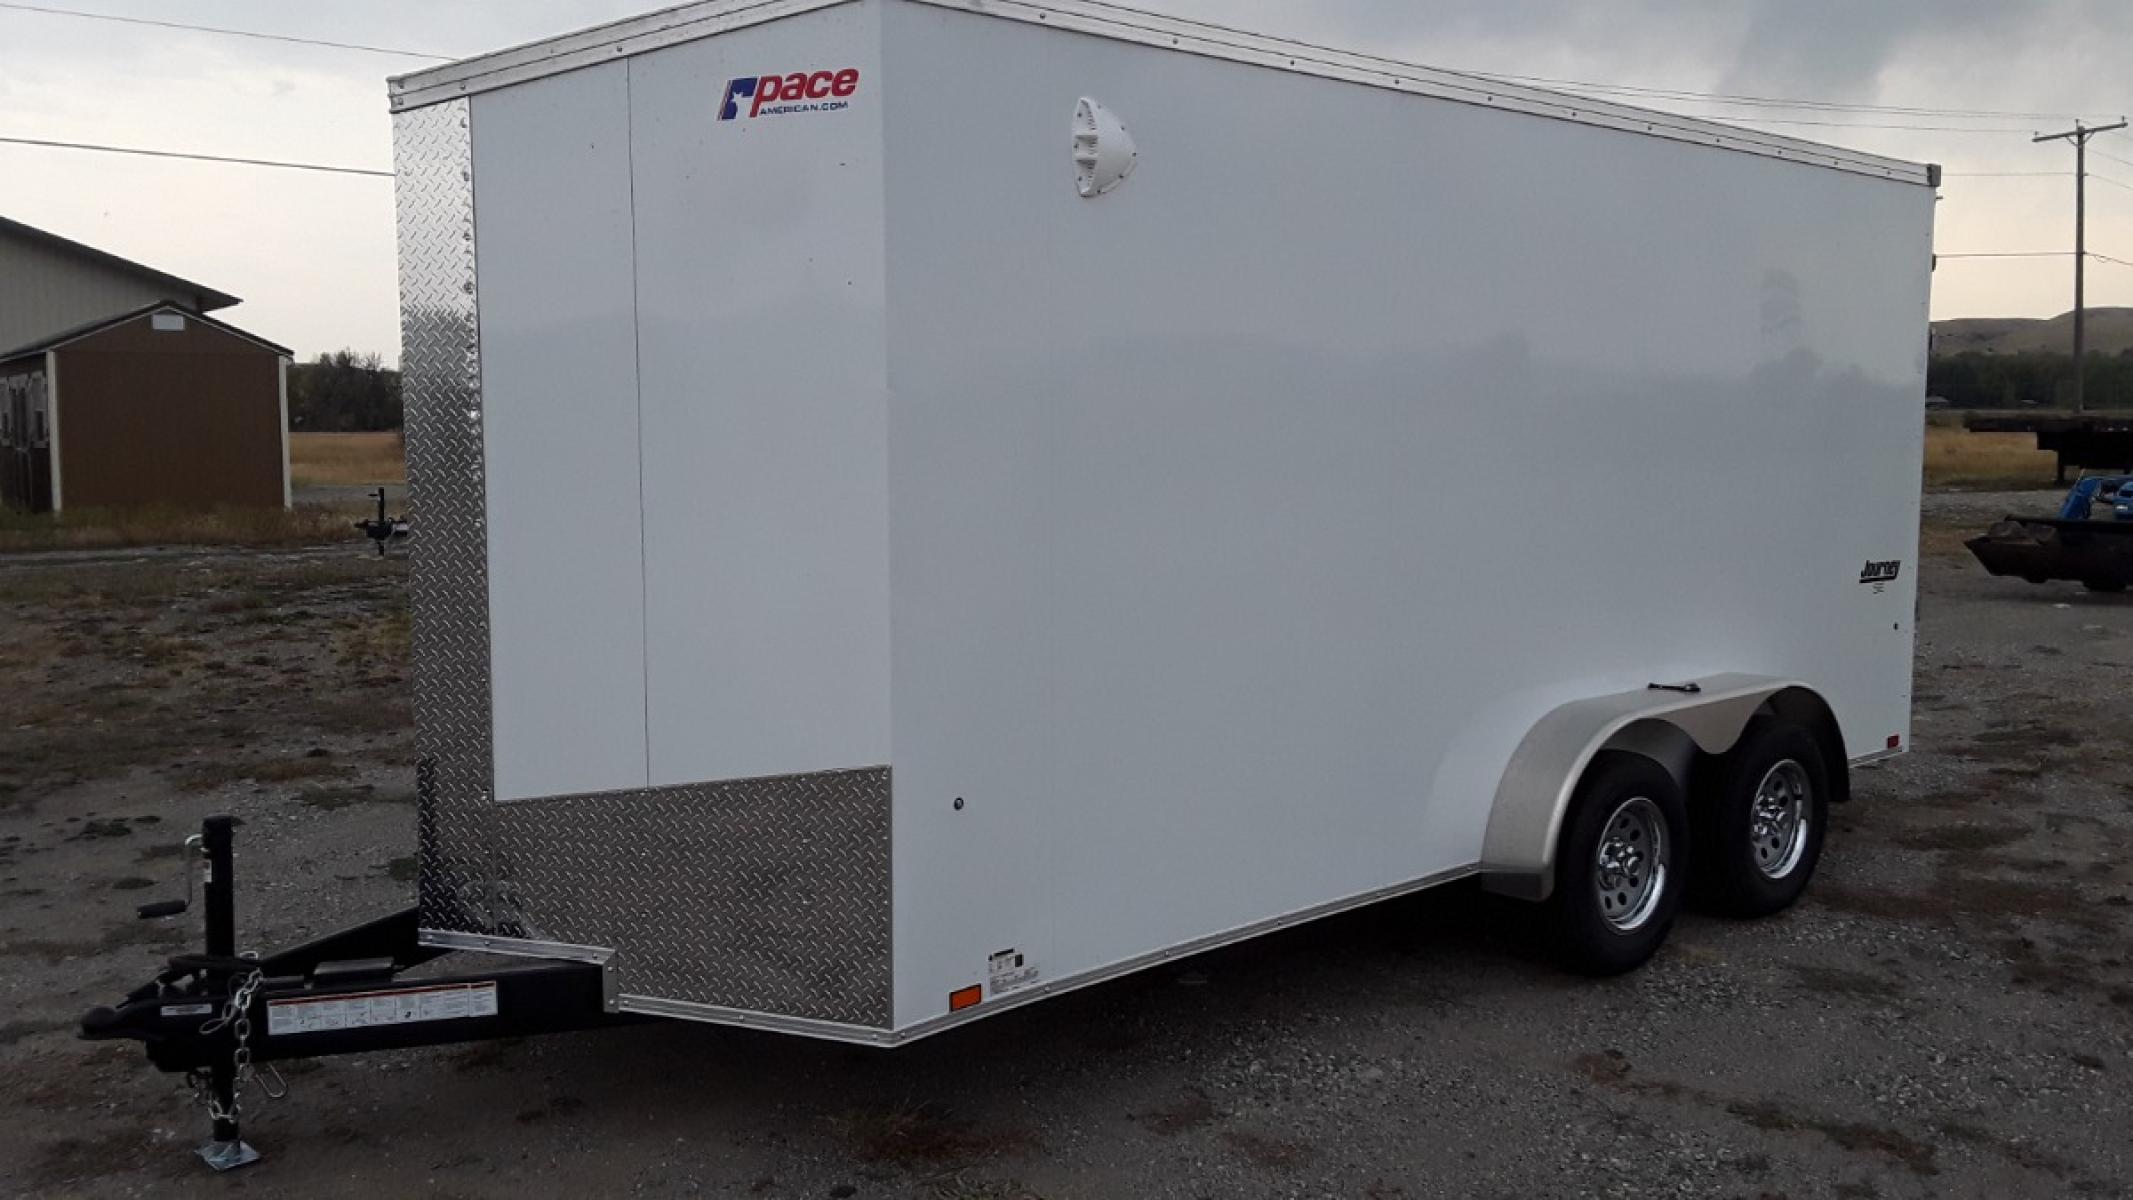 2022 Pewter Pace 7 x 16 Journey SE , located at 310 West 1st Ave, Big Timber, MT, 59011, (406) 860-8510, 45.833511, -109.957809 - NEW PACE 7 X 16 JOURNEY SE V-NOSE CARGO TRAILER, 7K GVW, 78" REAR OPENING DOOR HEIGHT, TUBE SIDEWALL SUPPORTS ON 16" CENTERS, FLOOR CROSSMEMBERS ON 16" CENTERS, SCREWLESS EXTERIOR, TUBE FRAME CONSTRUCTION W- 3 YEAR WARRANTY, 15" RADIAL TIRES, EZ LUB HUBS, REAR RAMP DOOR, FLUSH MOUNTED RV SIDE DOOR W - Photo #3